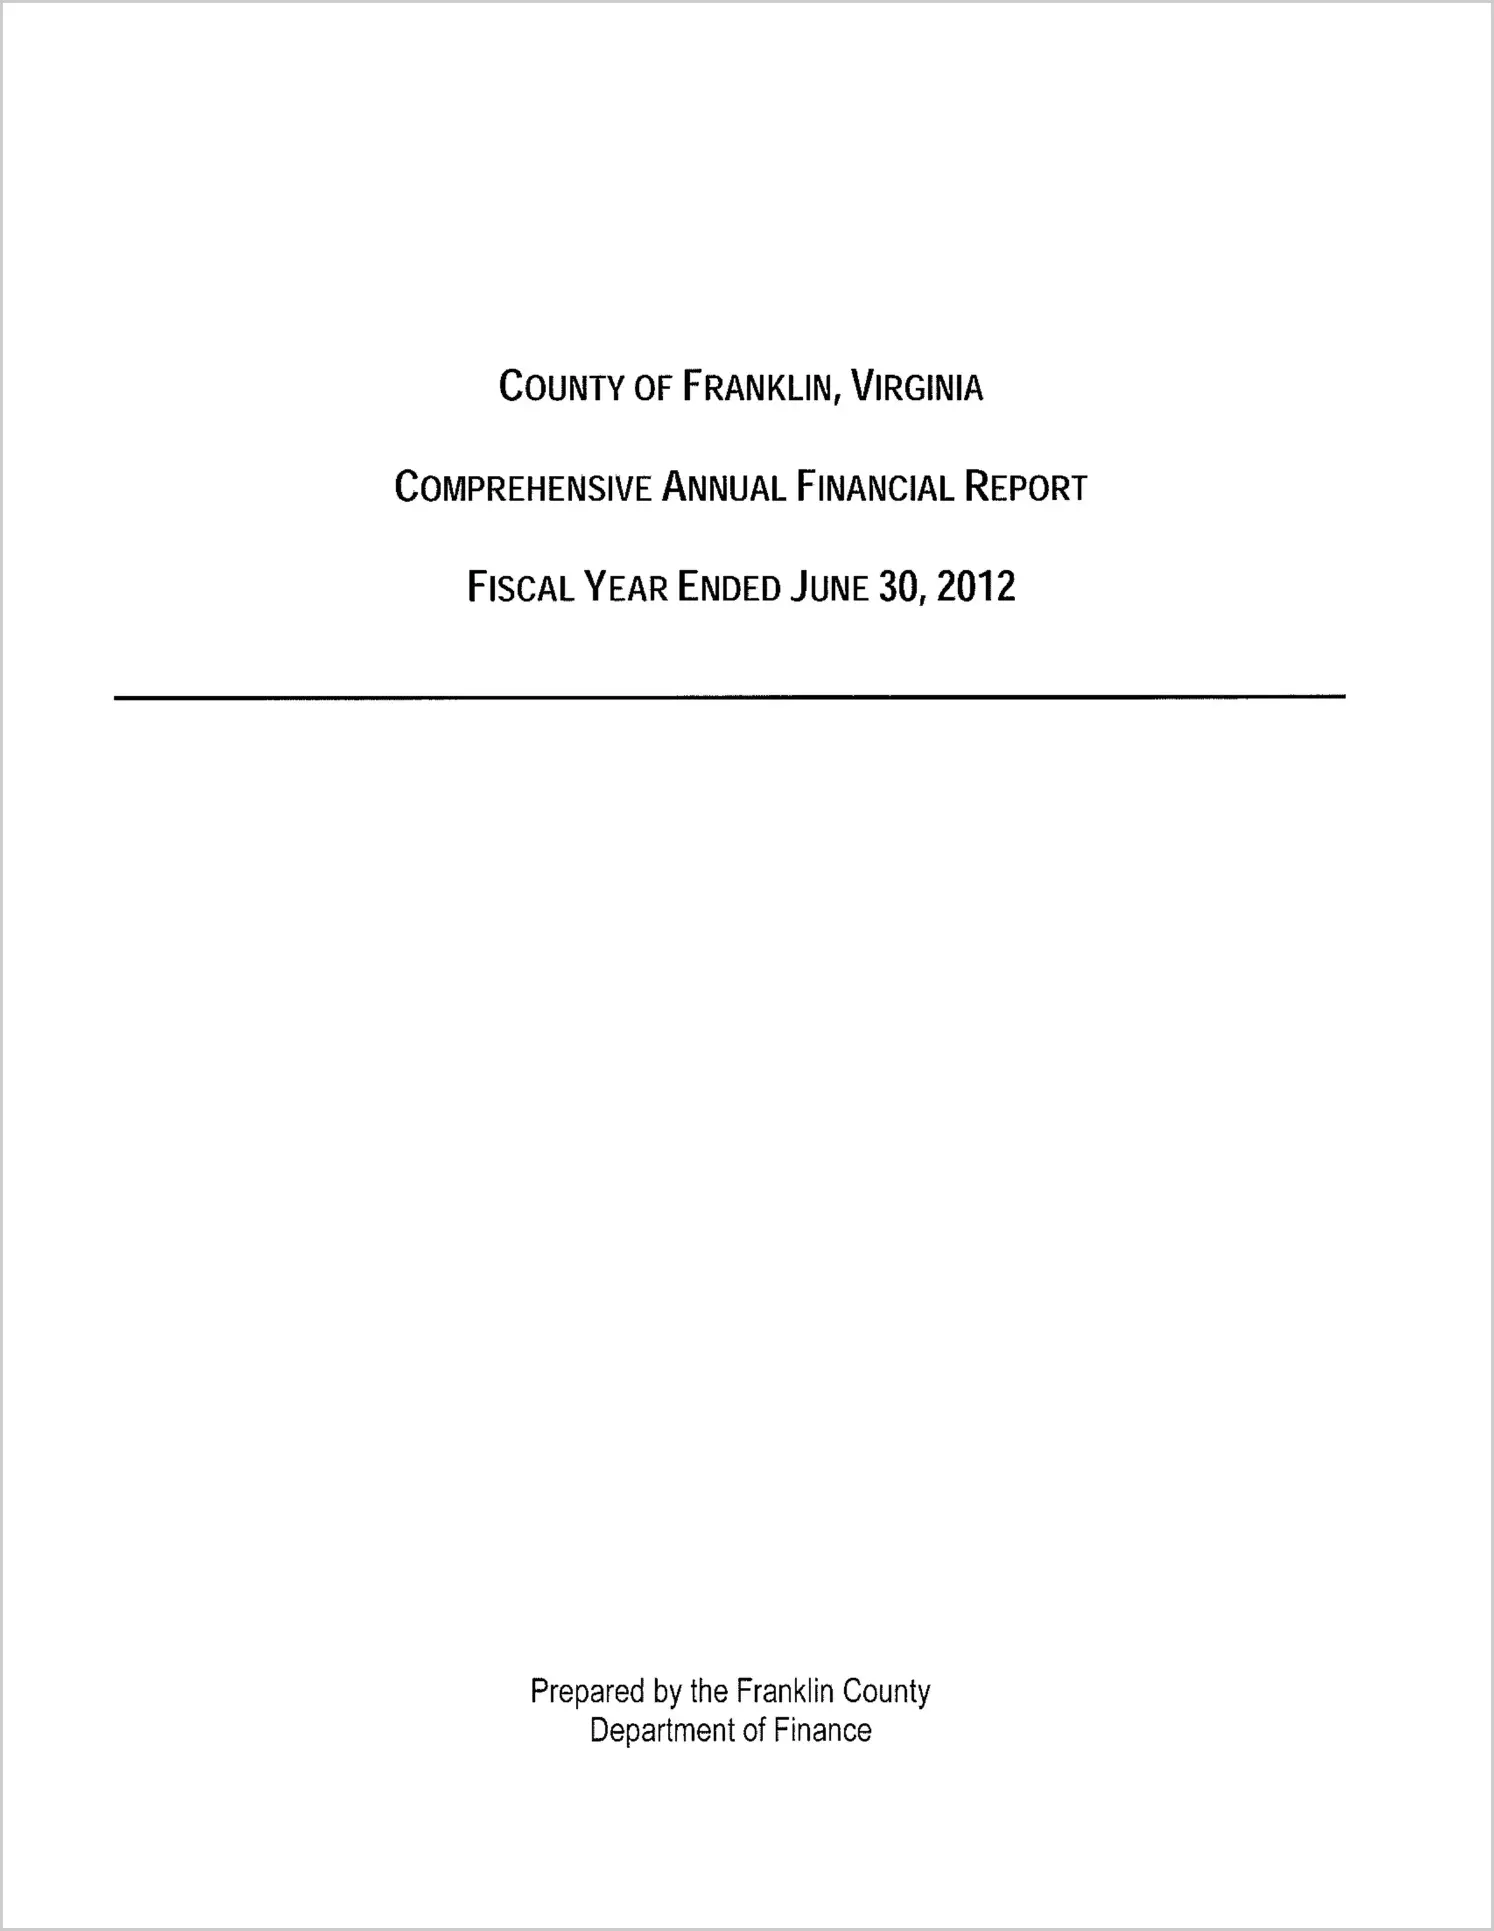 2012 Annual Financial Report for County of Franklin